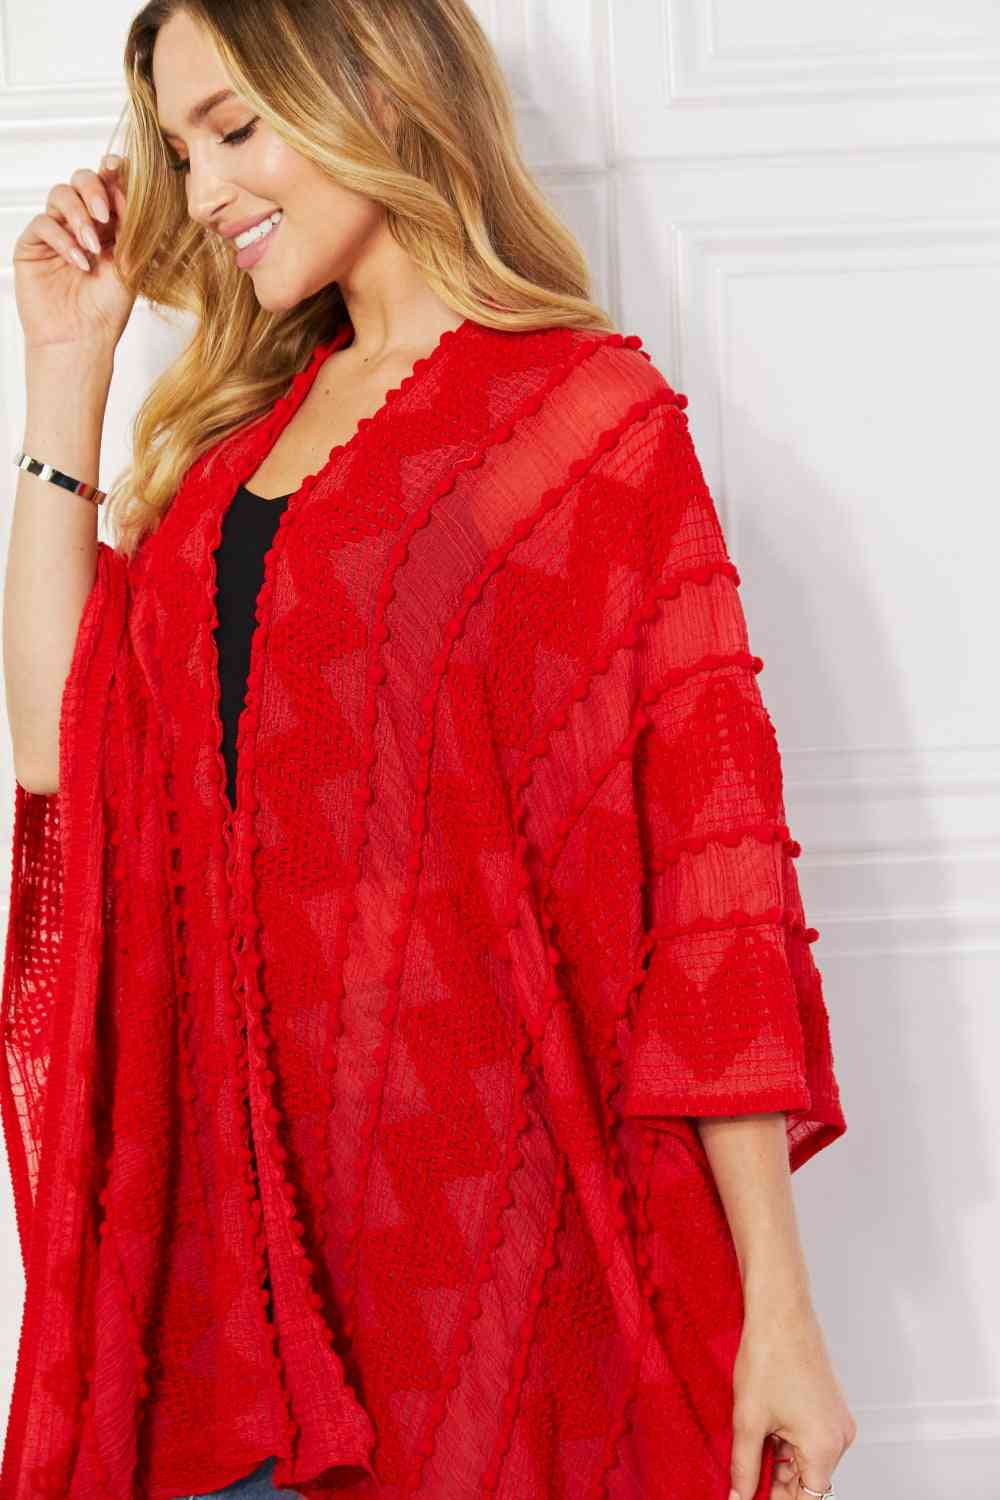 Pom-Pom Asymmetrical Poncho Cardigan in Red - Red / One Size - Women’s Clothing & Accessories - Outerwear - 12 - 2024